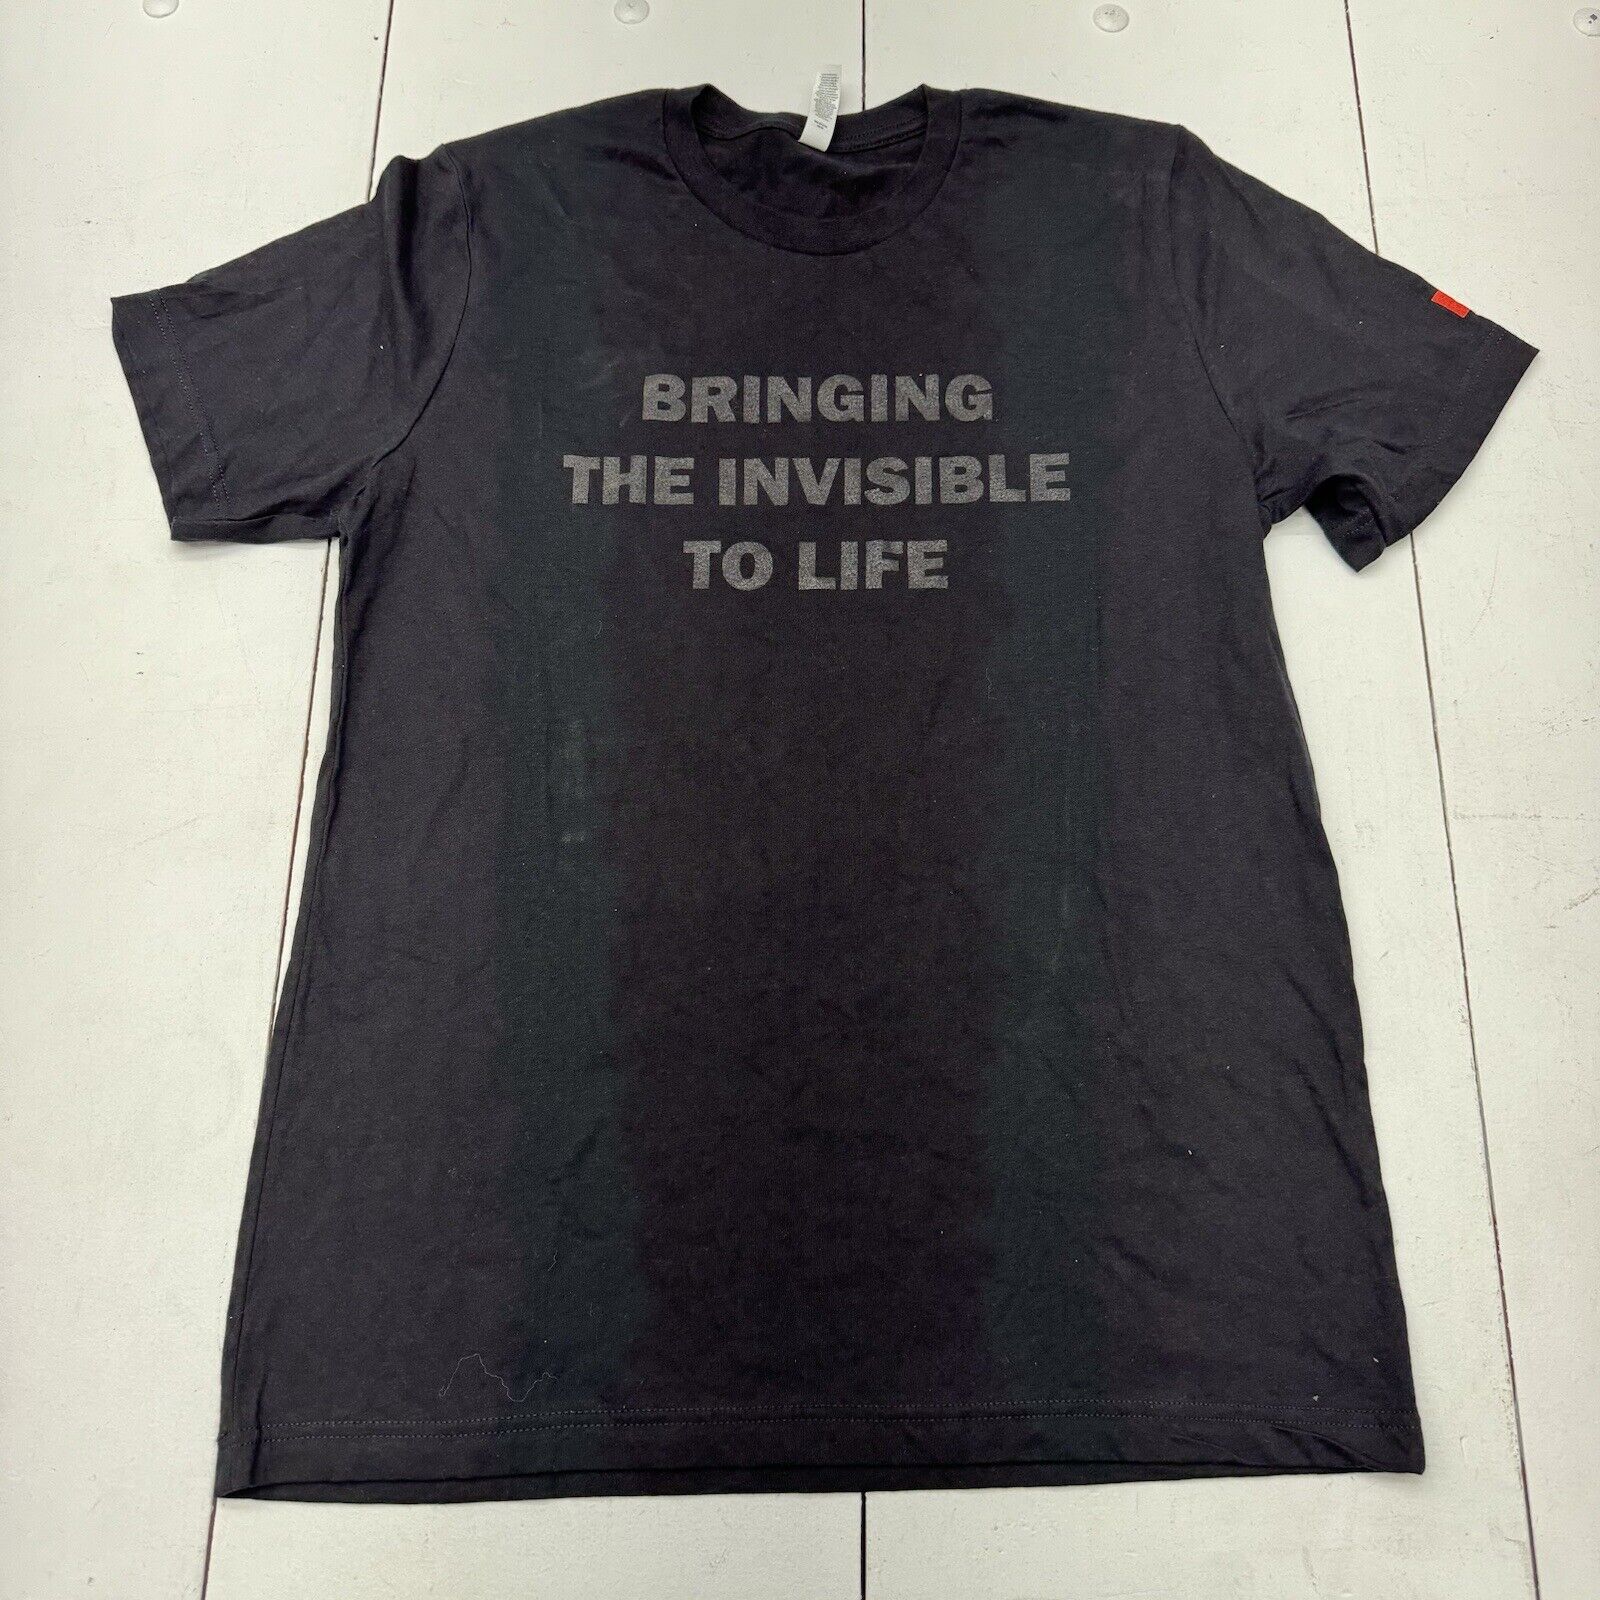 Black Graphic T-Shirt ‘Bringing The Invisible To Life’ Shirt Sleeve Adult Size L